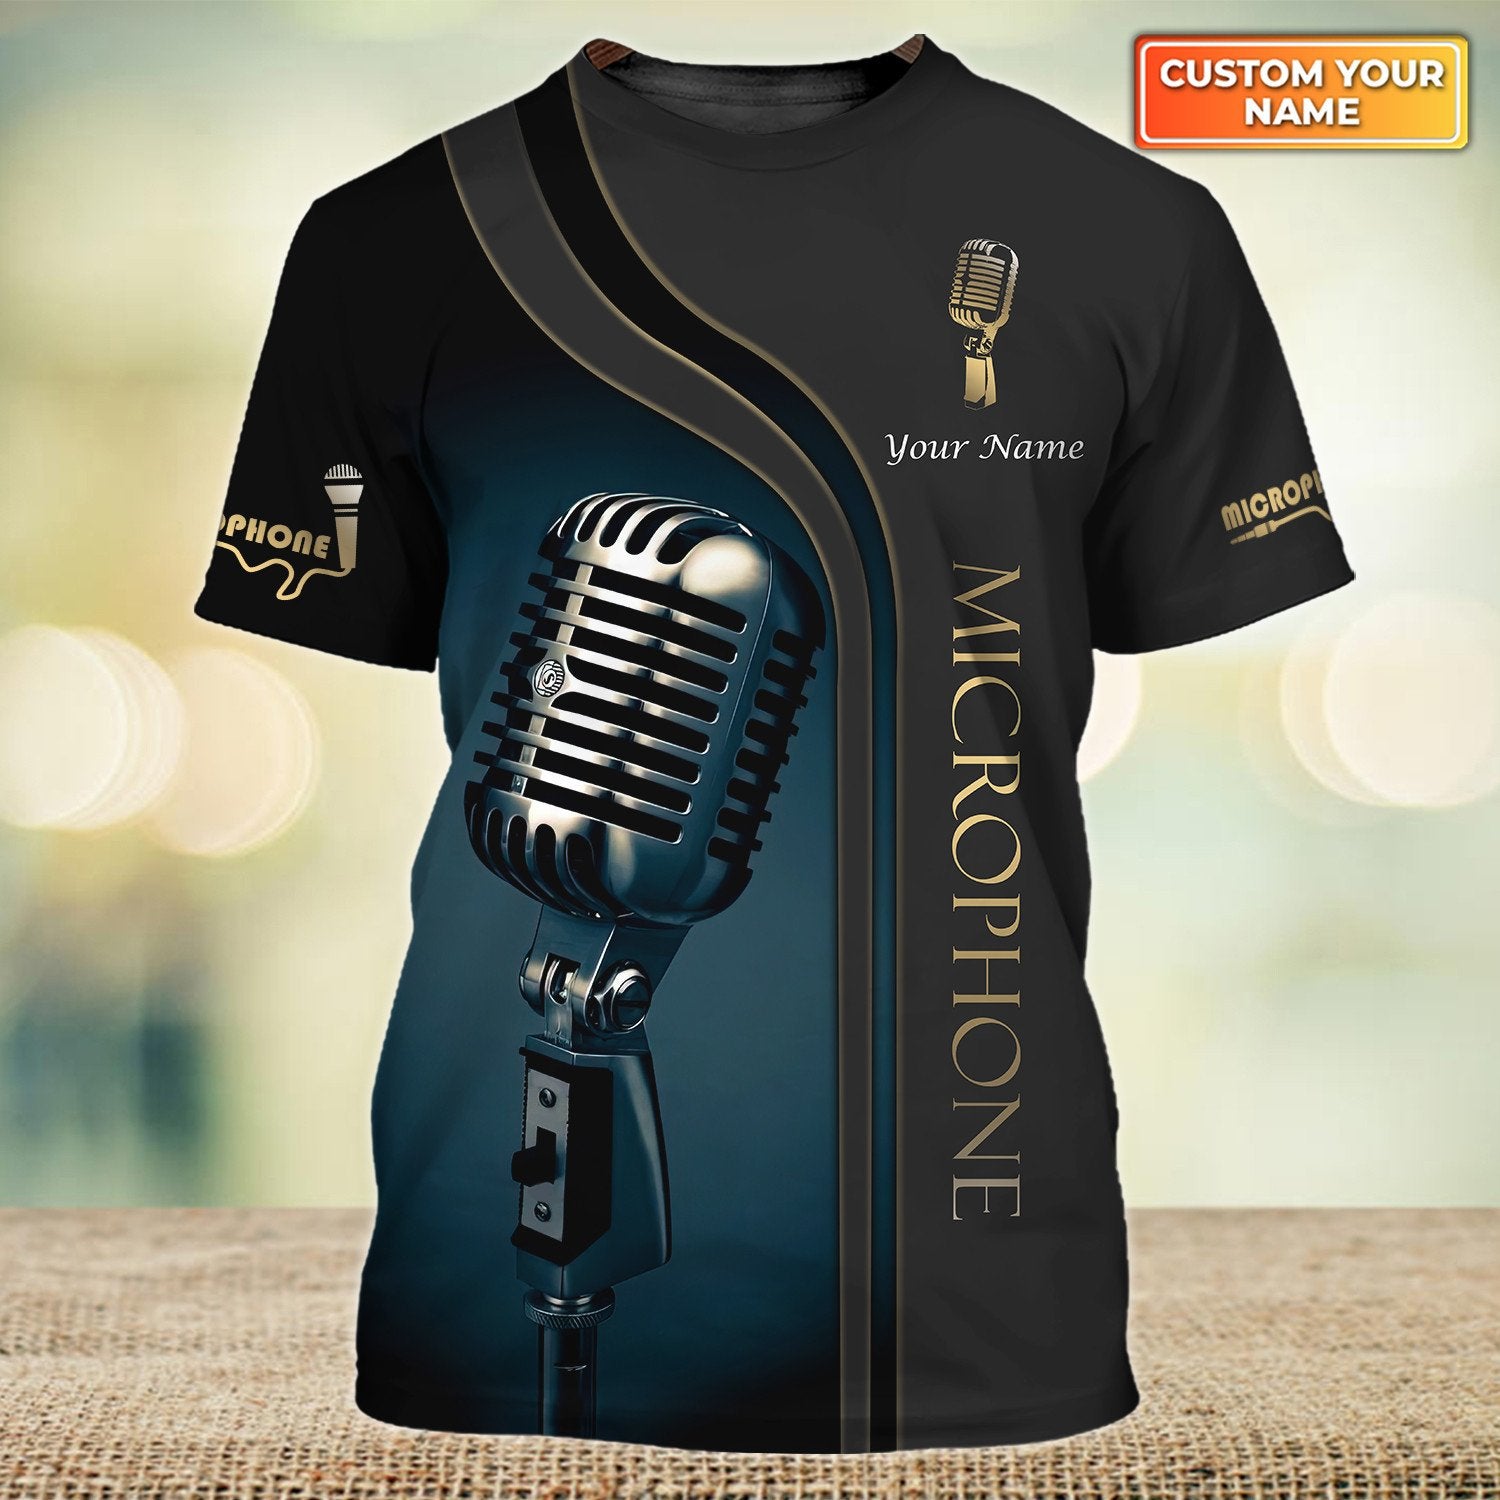 Personalized Microphone Pattern Design T-Shirts